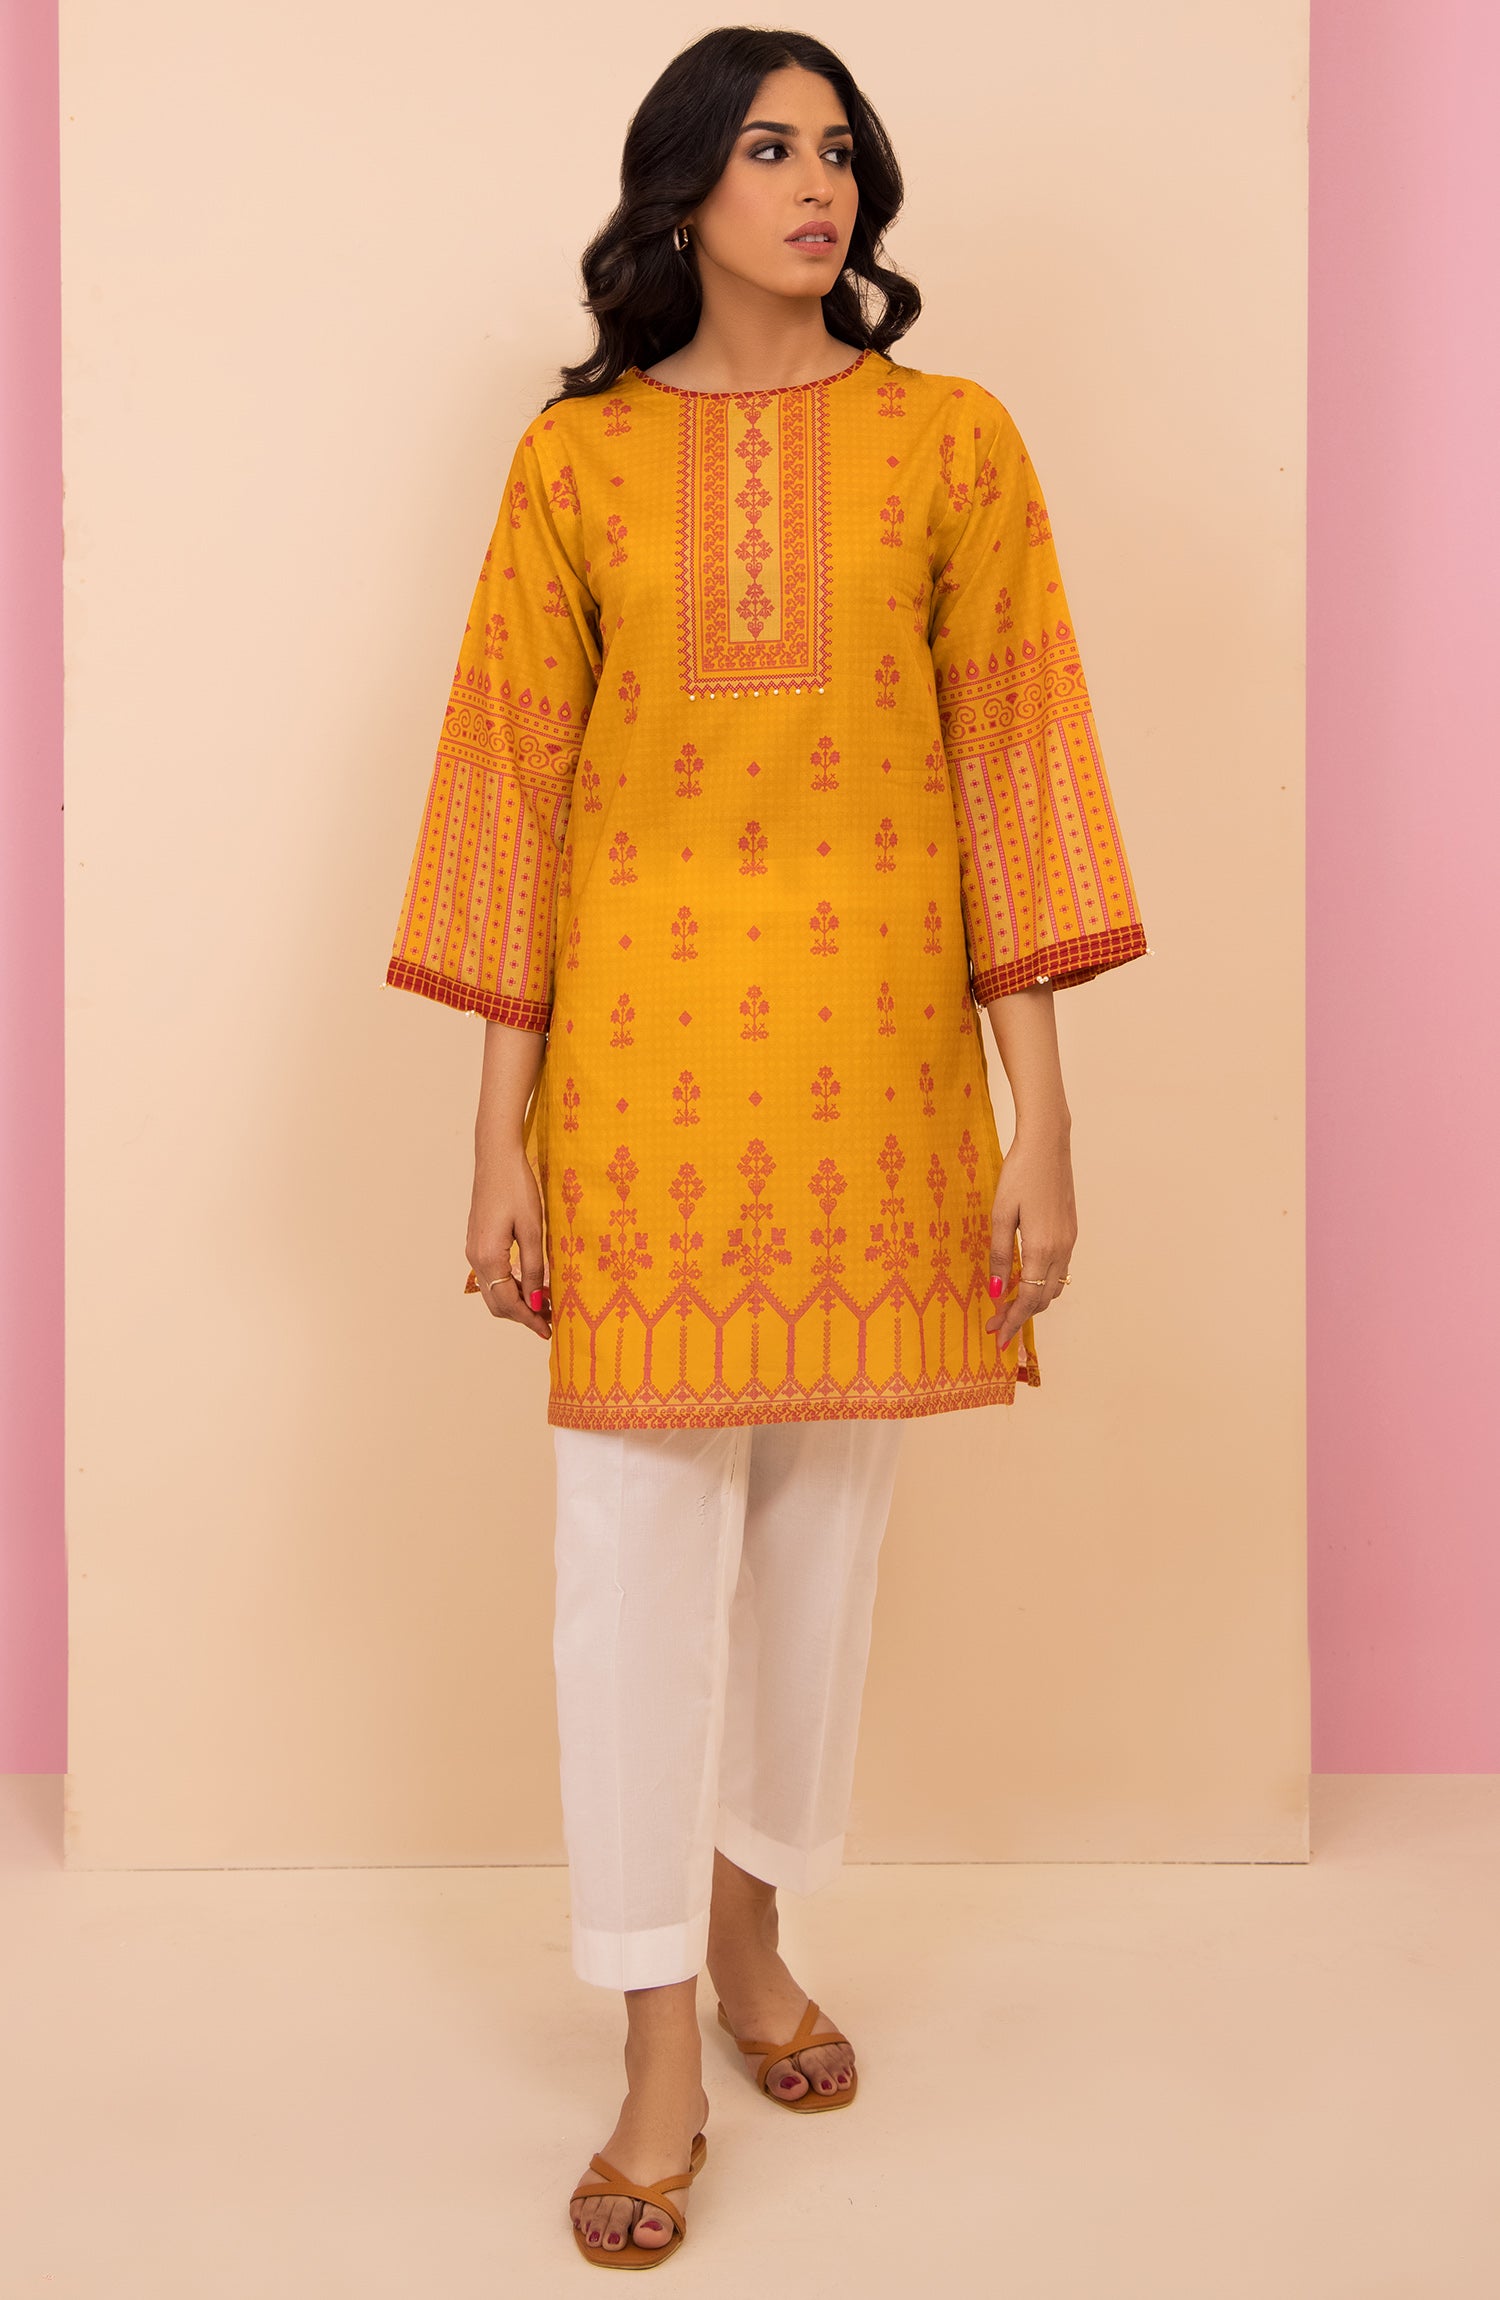 HCS-22-033/S YELLOW LAWN SCSHIRT READY TO WEAR SHIRT